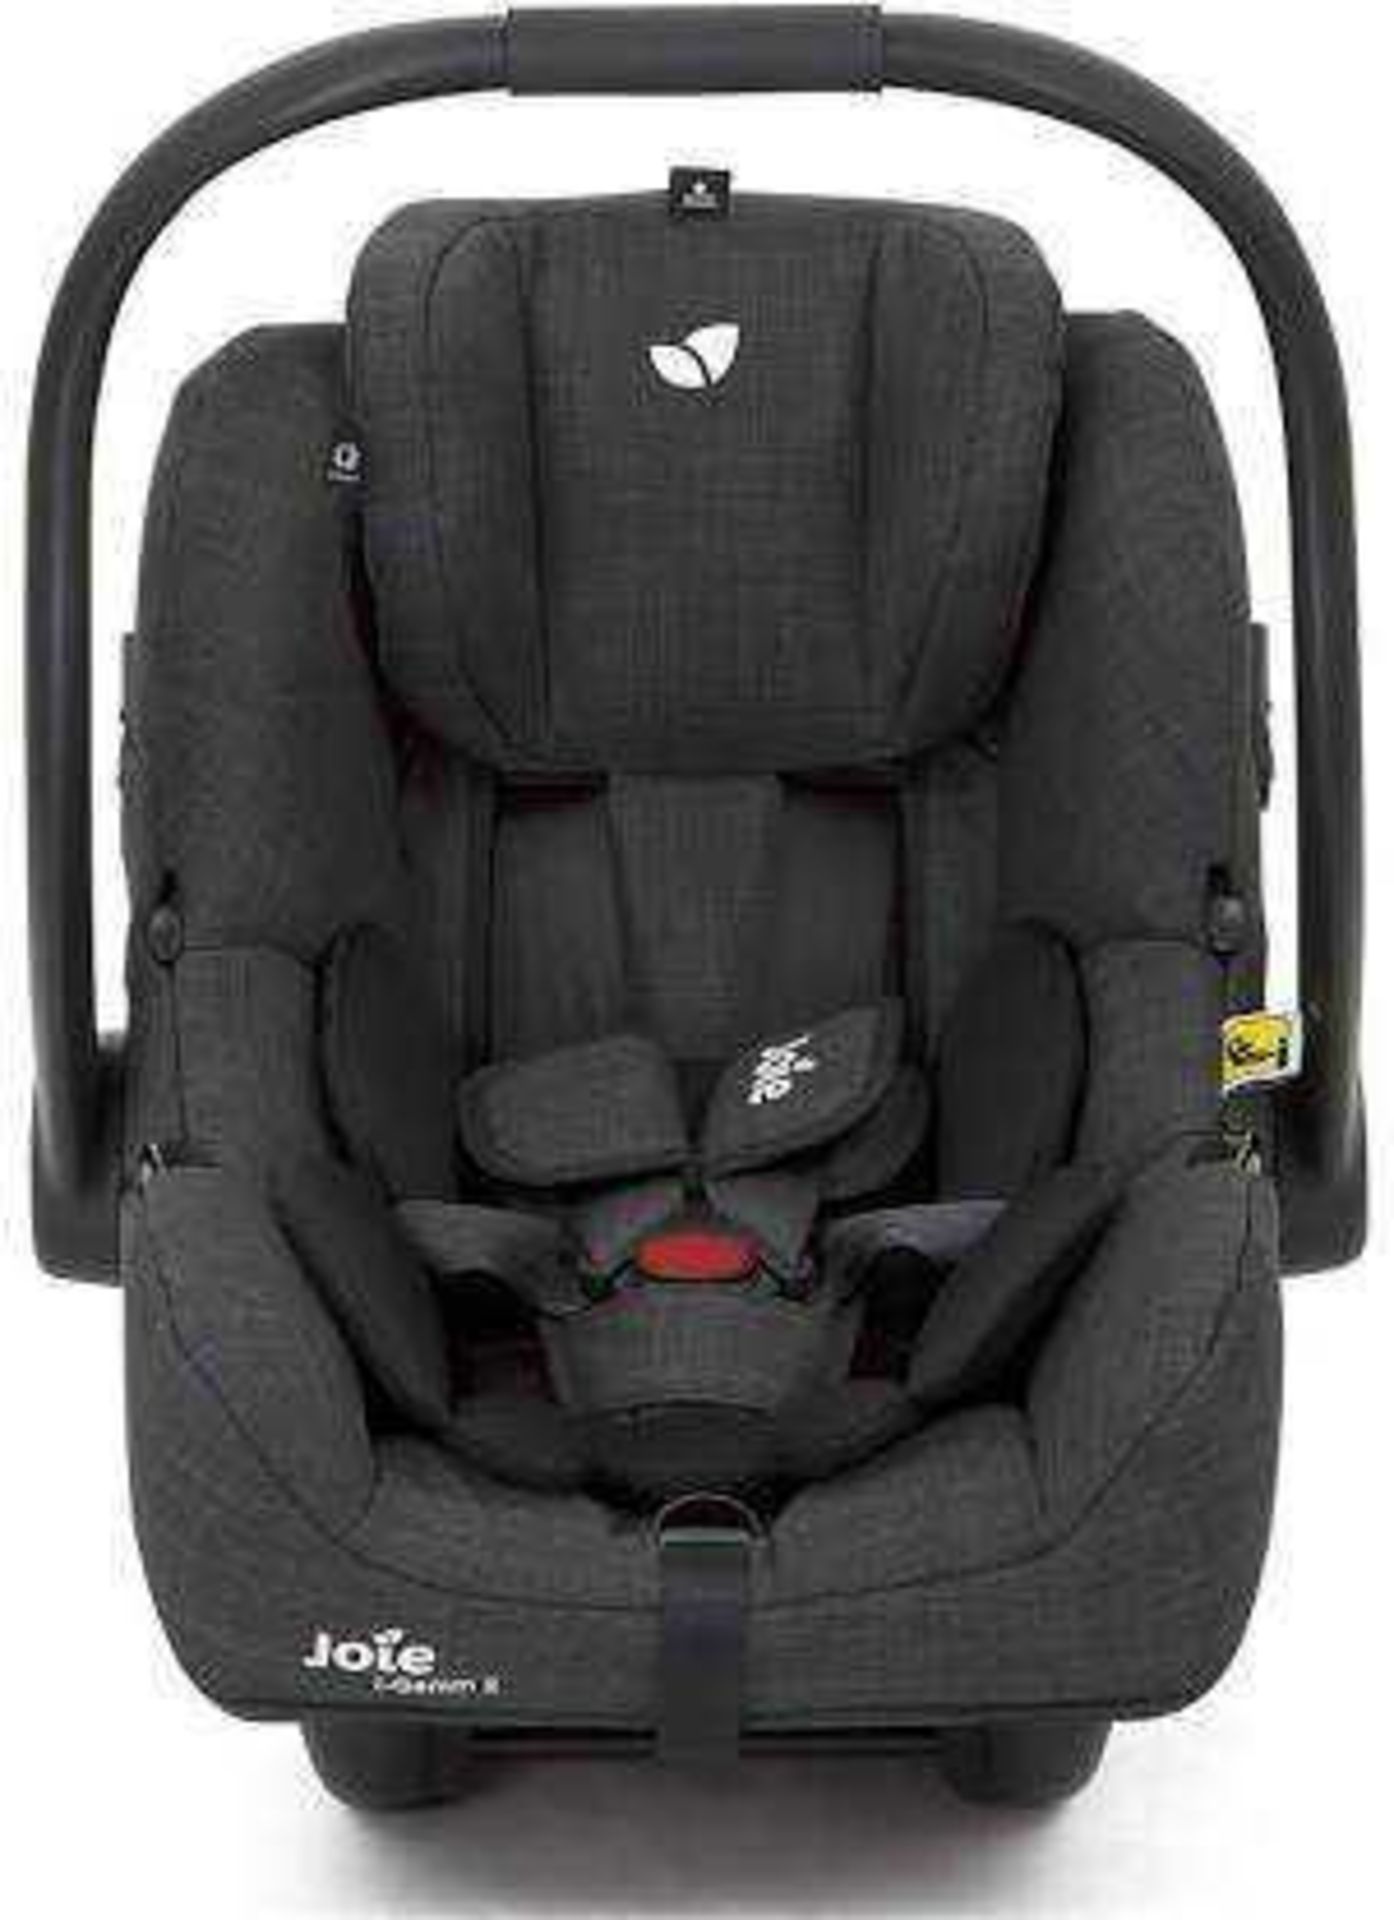 Rrp £90 Unboxed Joie I-Gemm Car Carry Seat